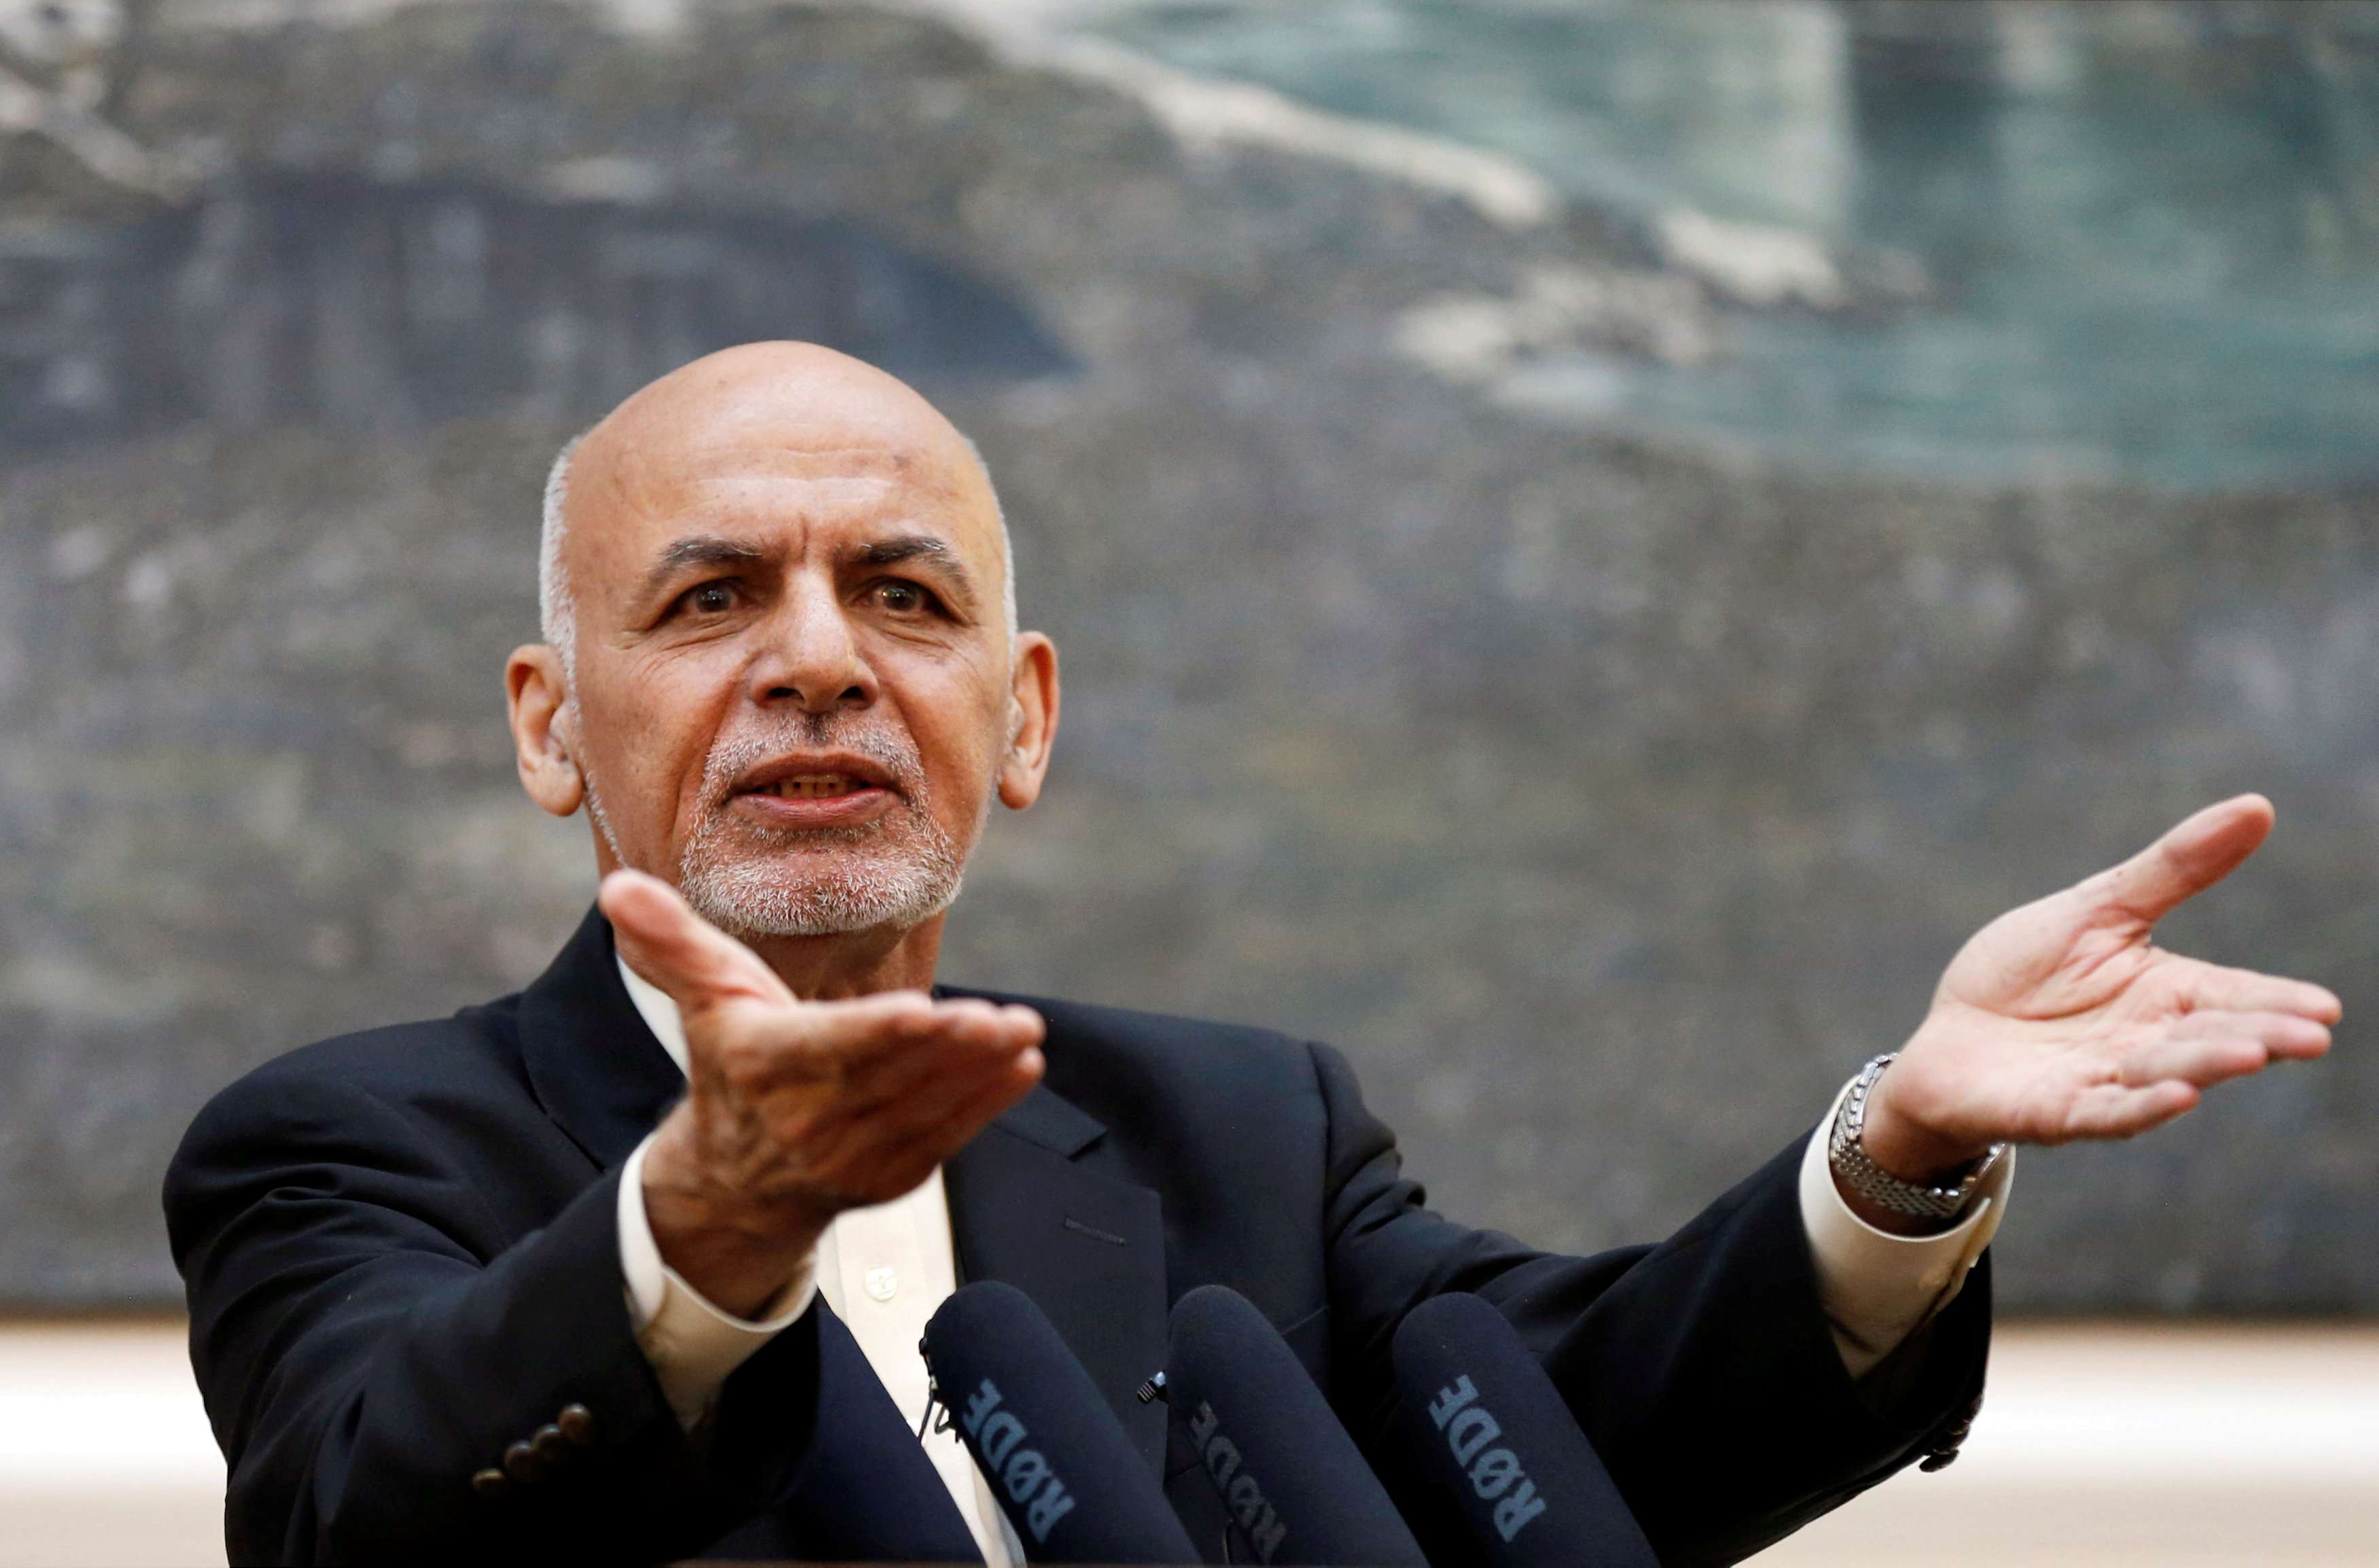 The 12-person team was first announced in November by President Ashraf Ghani as part of a diplomatic effort to bring the Taliban to the table for peace talks